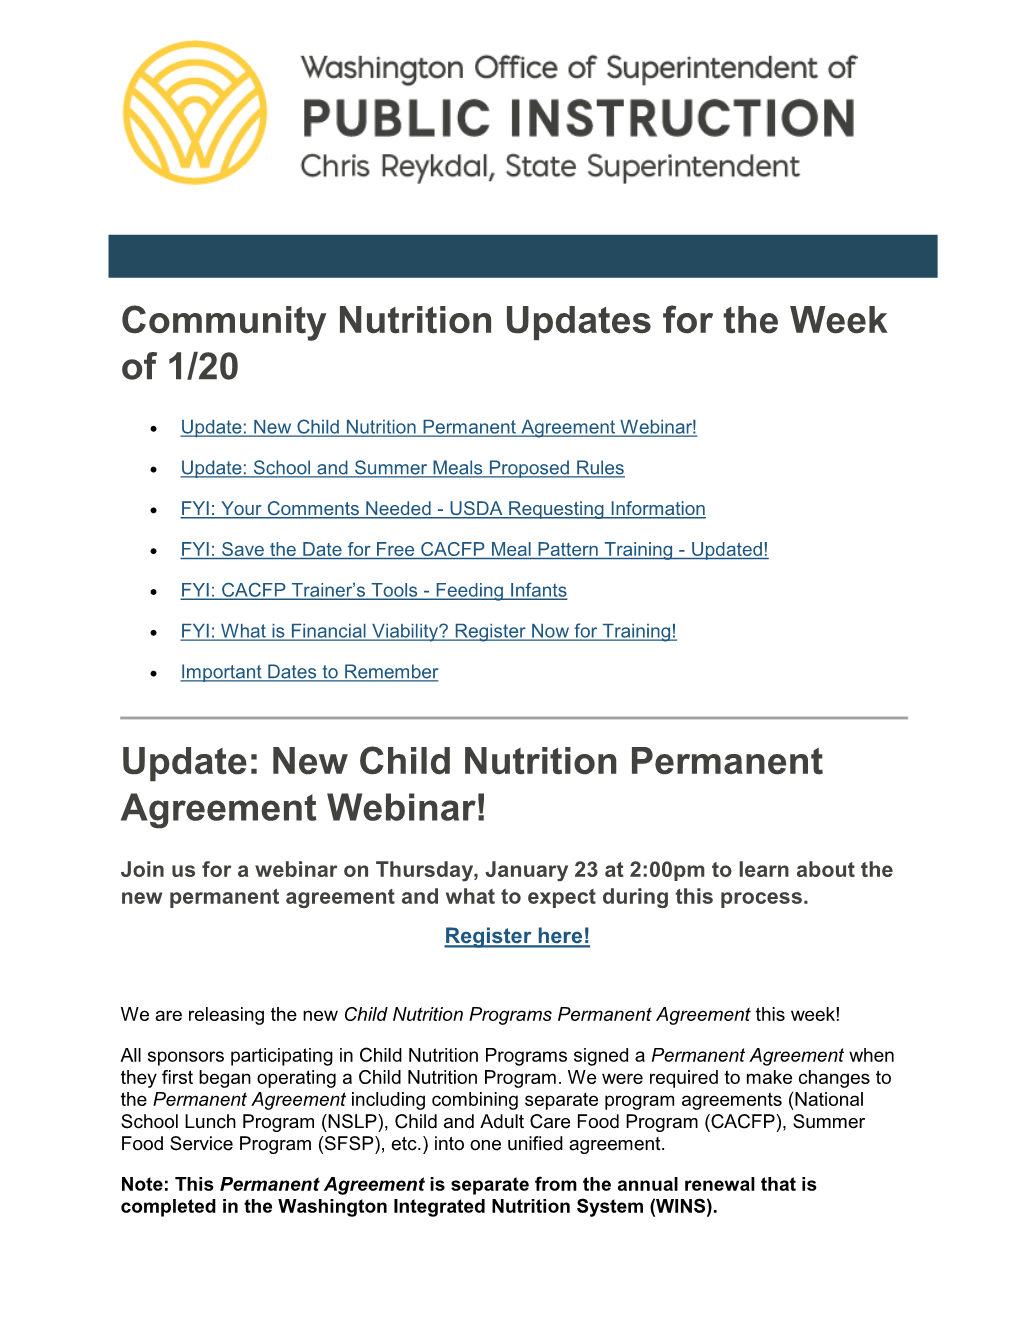 Community Nutrition Updates for the Week of 1/20